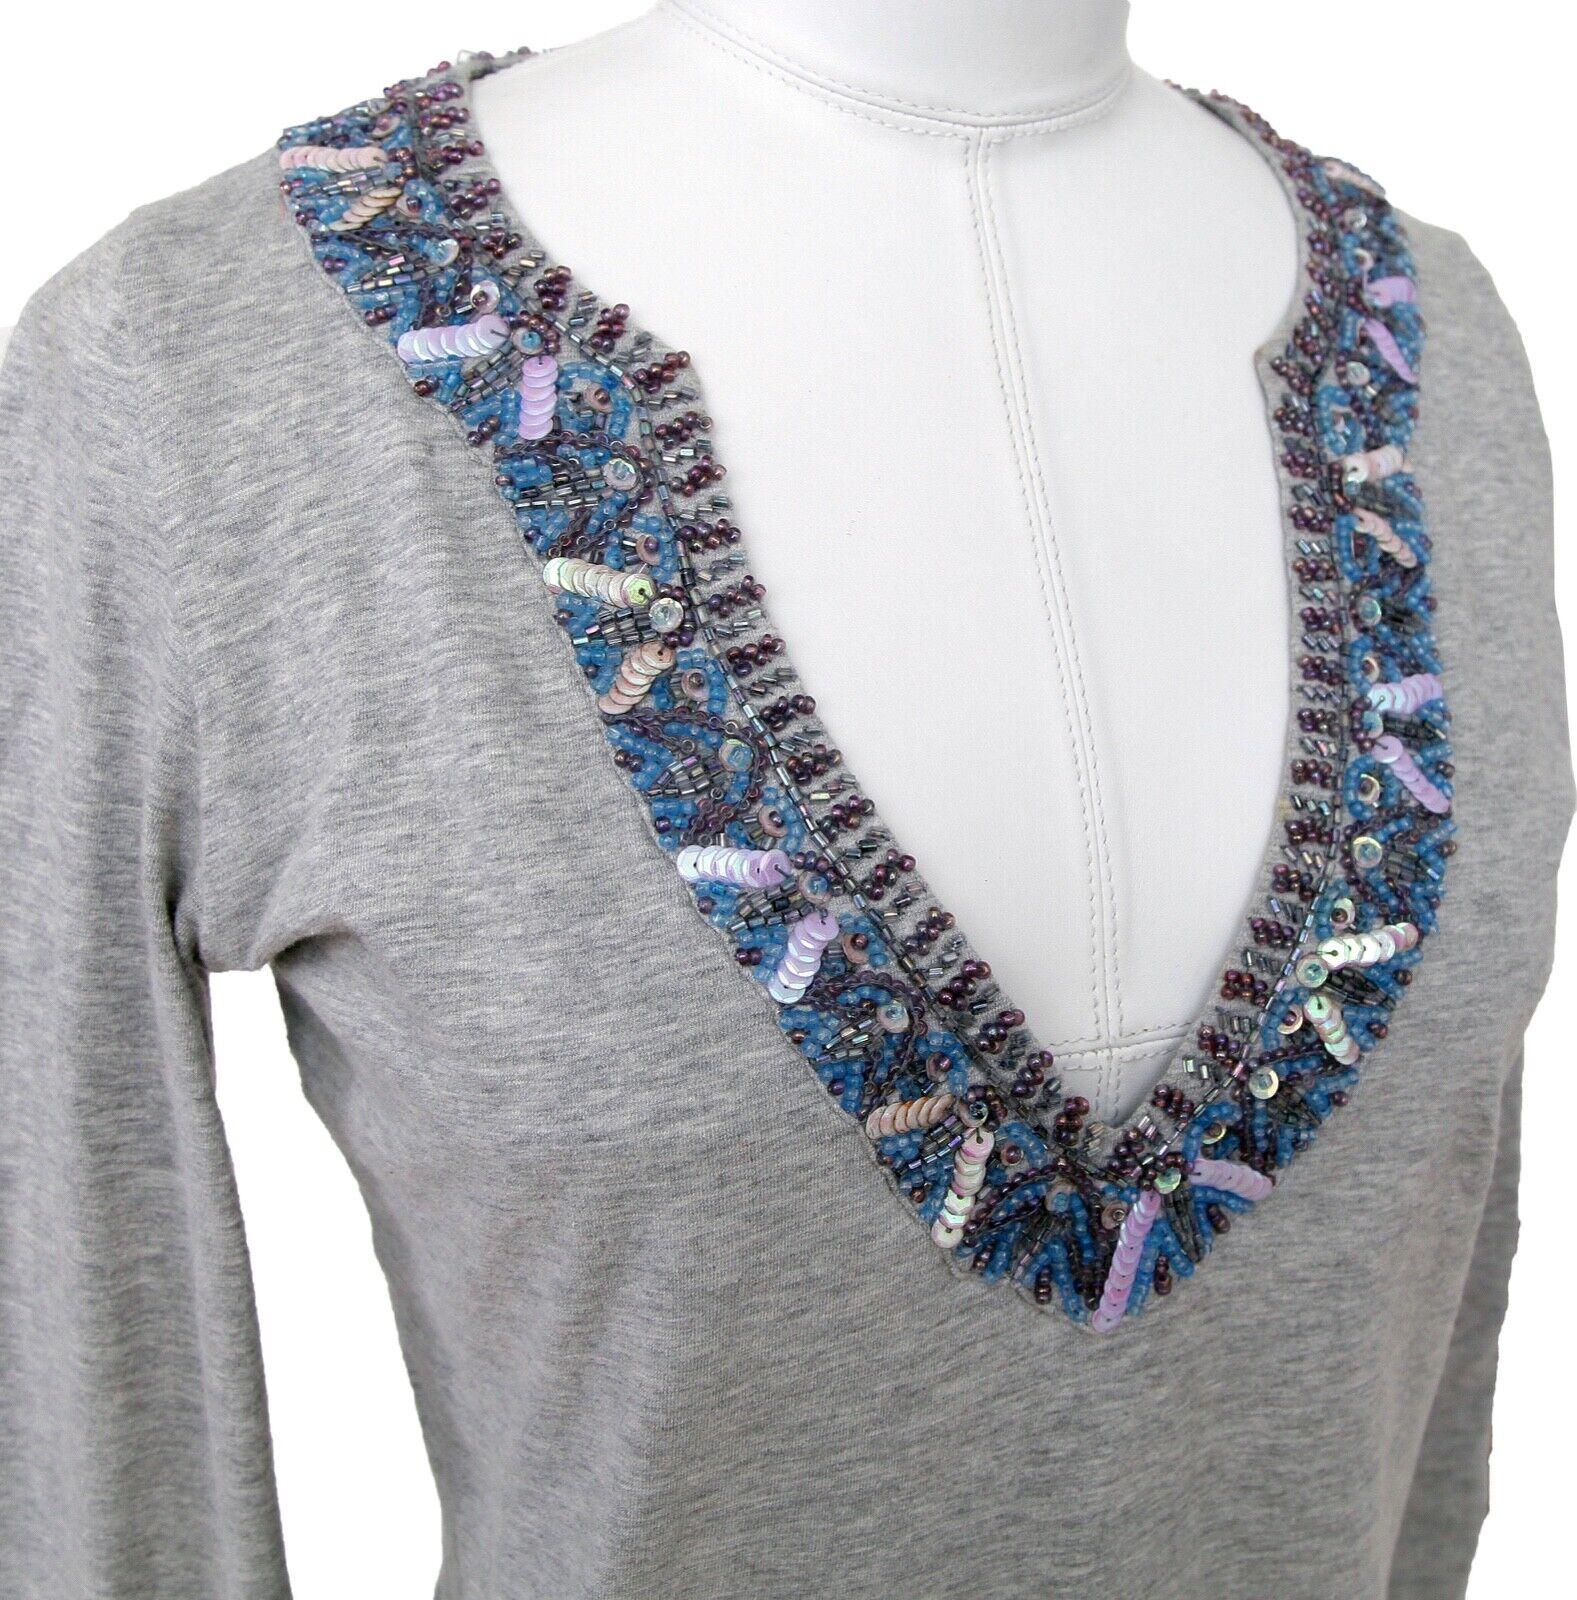 Gray ETRO Top Shirt T-Shirt Grey Beads Sequin V-neck Long Sleeve Cotton Sz 42 For Sale